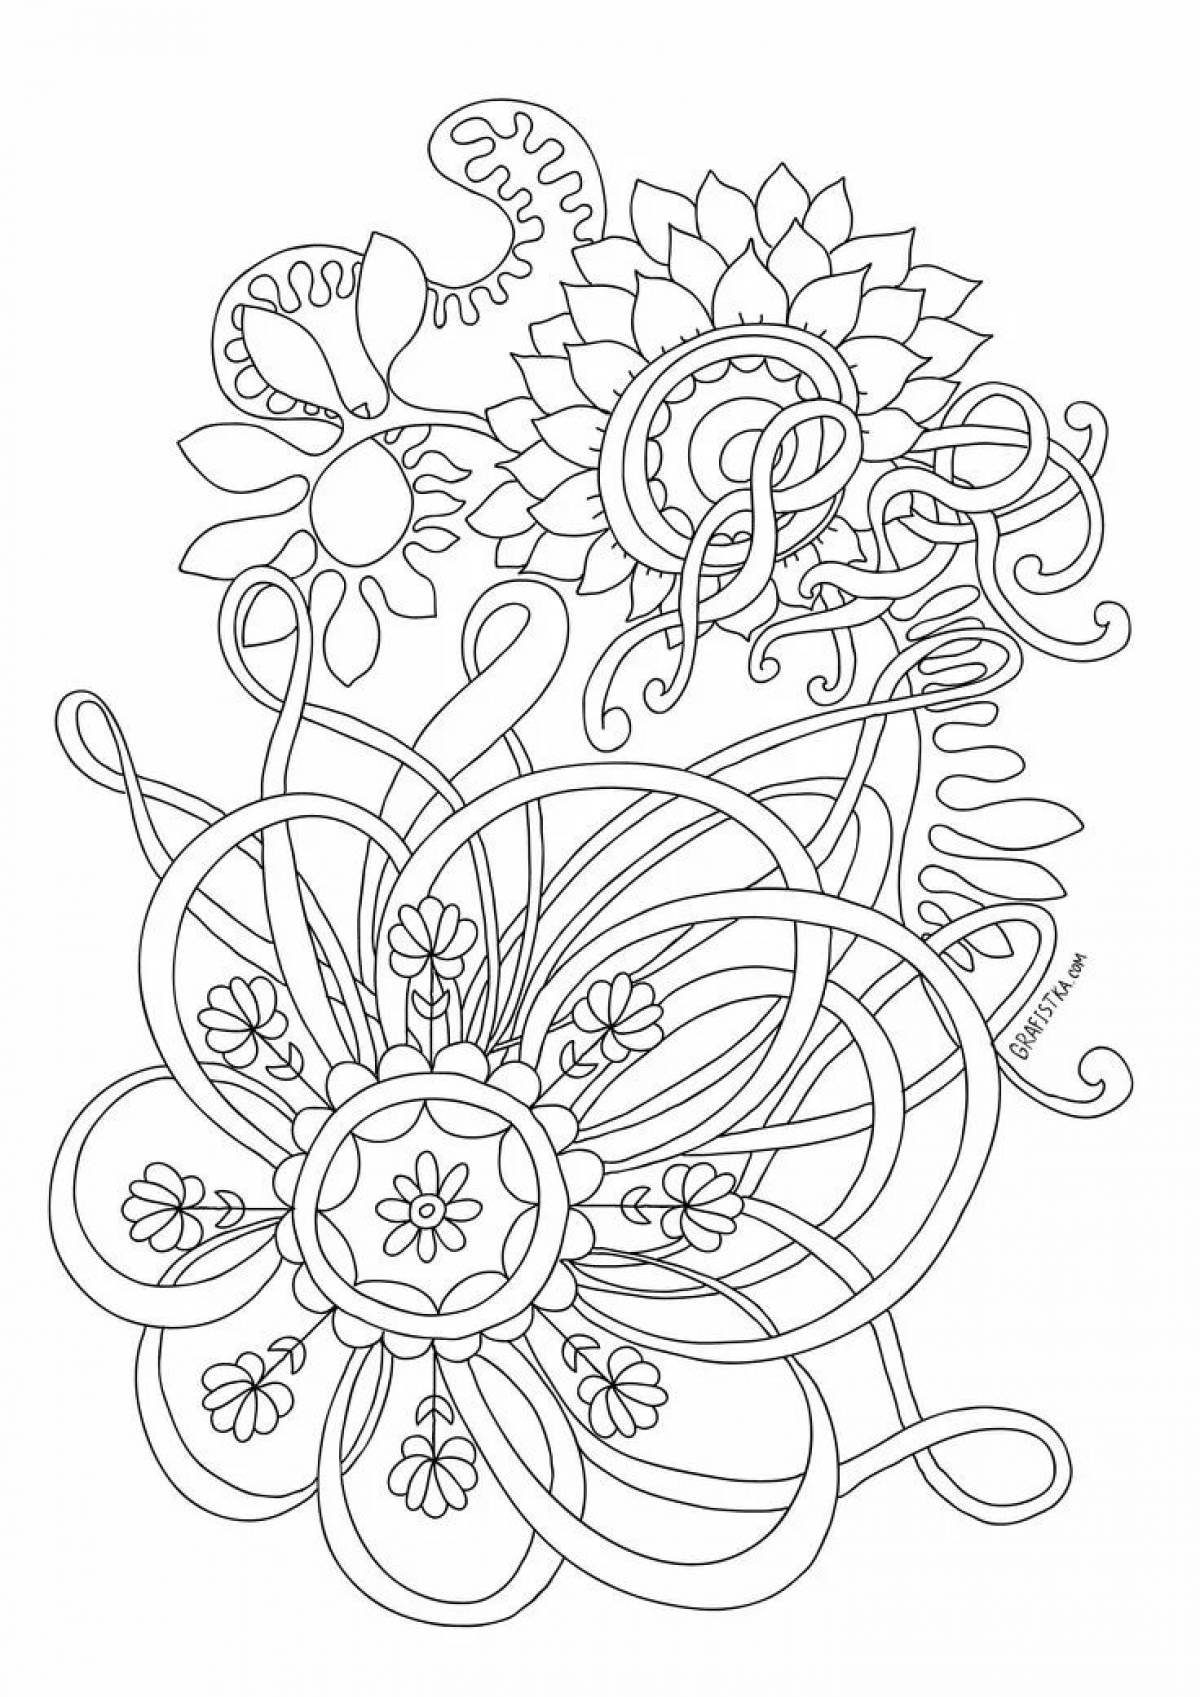 Coloring book with color drawing